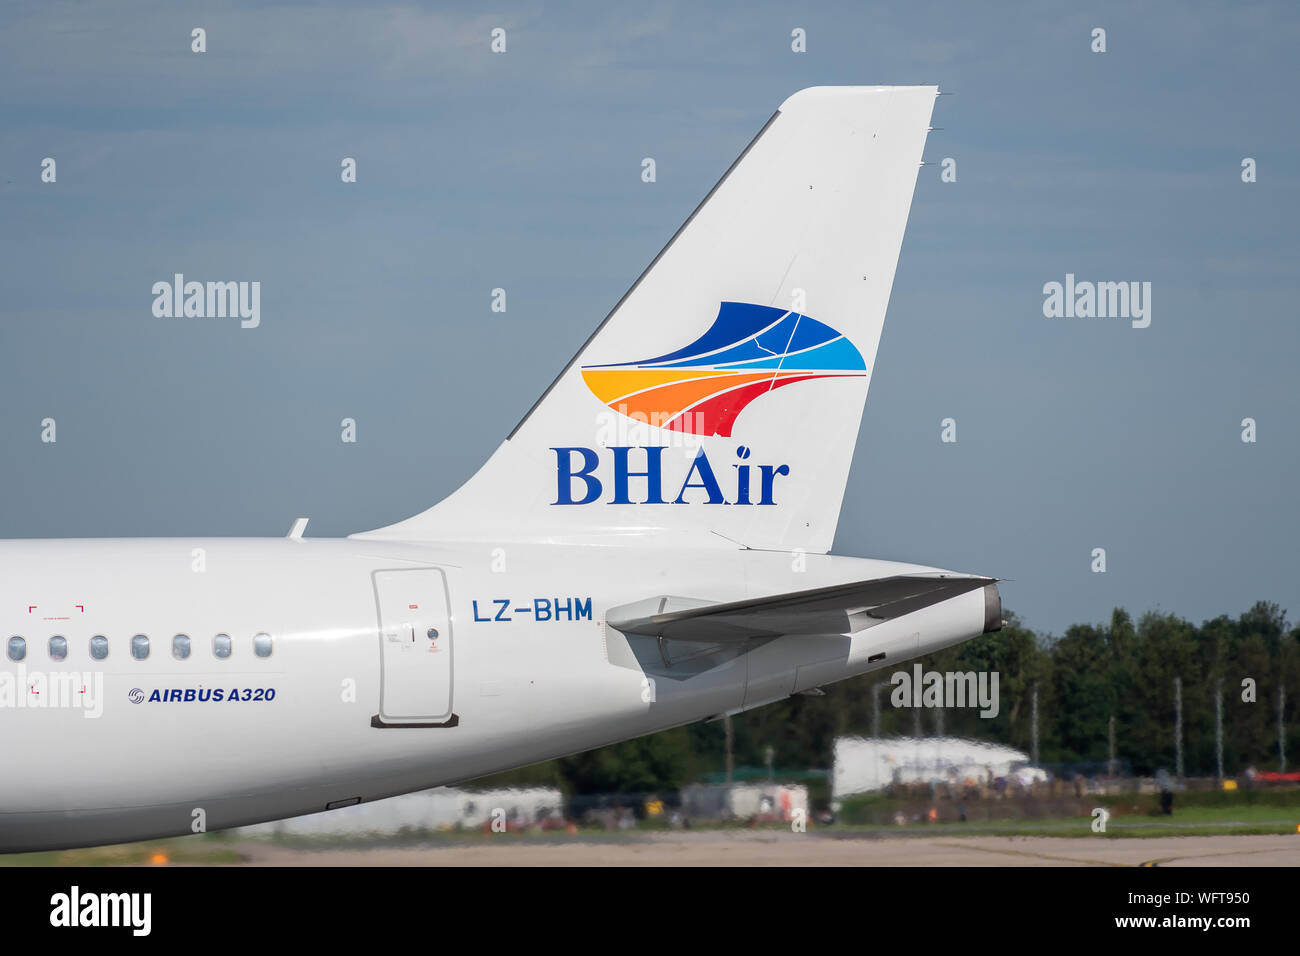 MANCHESTER, UNITED KINGDOM - AUGUST 24, 2019: BH Air Airbus A320 tail livery Stock Photo